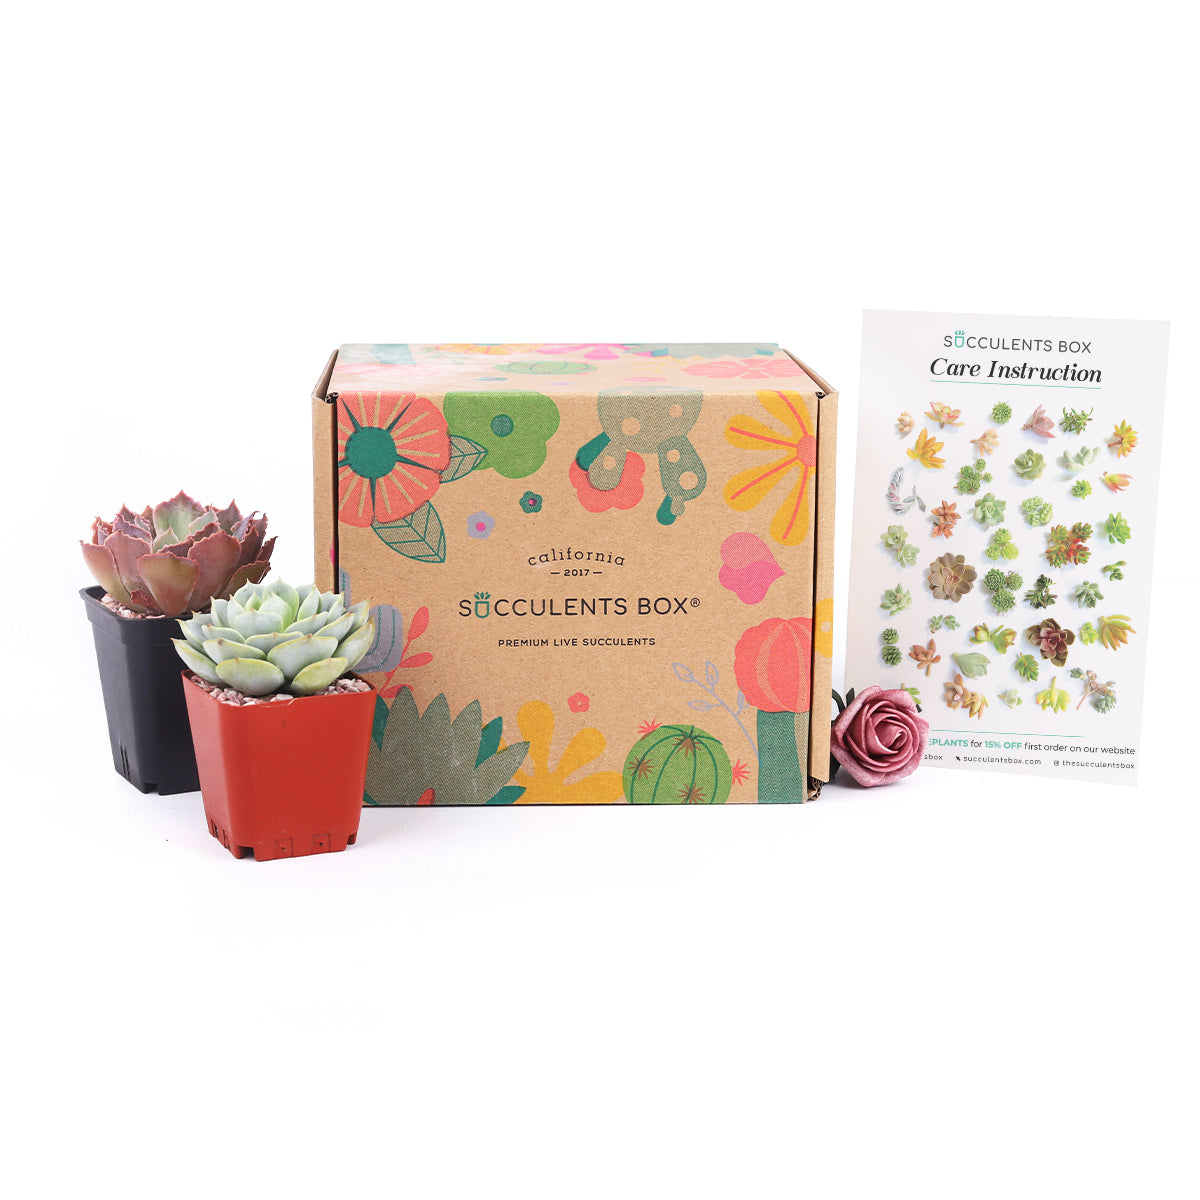 subscription box gift ideas for mom, gift box monthly subscription, mother's day gifts, mother's day gift ideas, best mother's day gifts, personalized mother's day gifts, Types of Succulents, Succulents Shop in California, Succulents and Cactus Plants